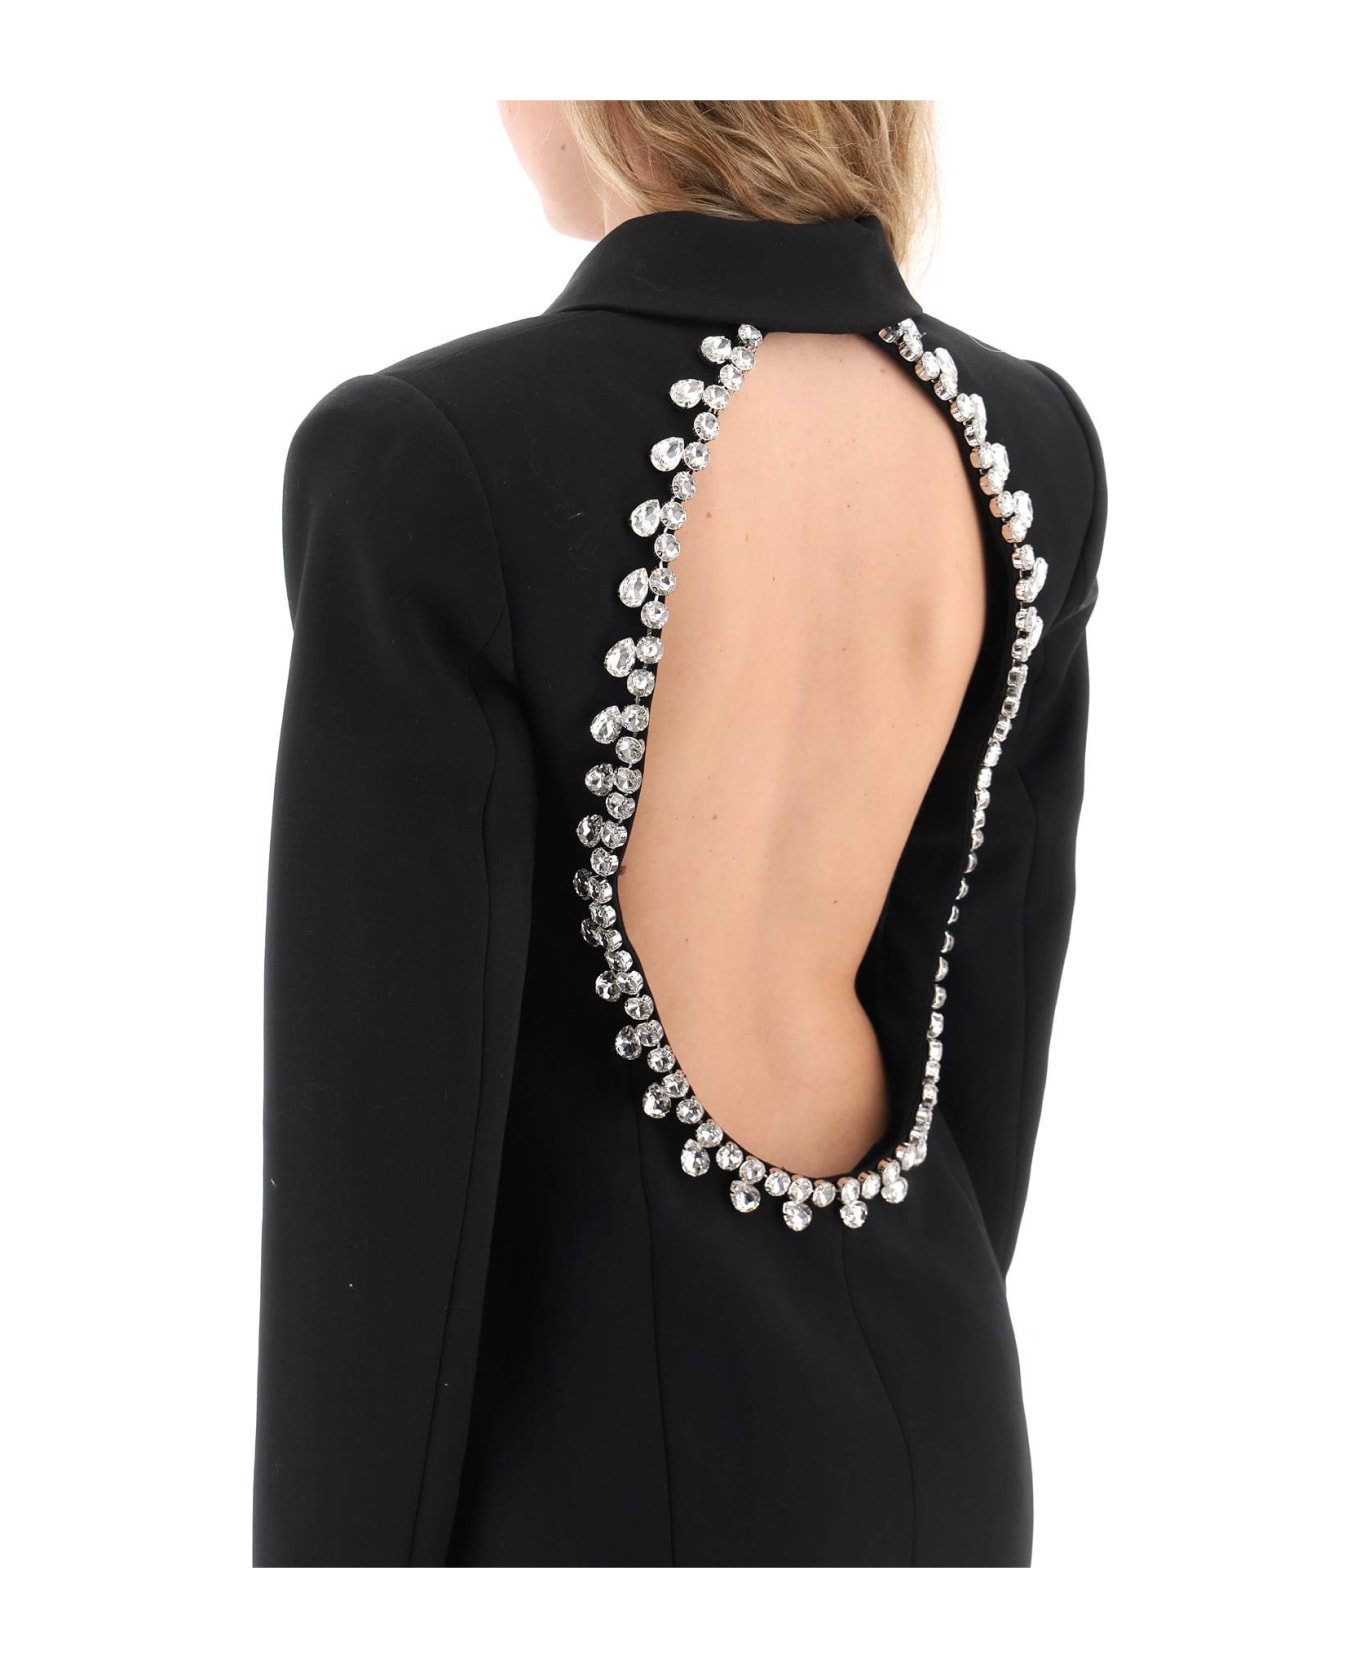 AREA Blazer Dress With Cut-out And Crystals - BLACK (Black)